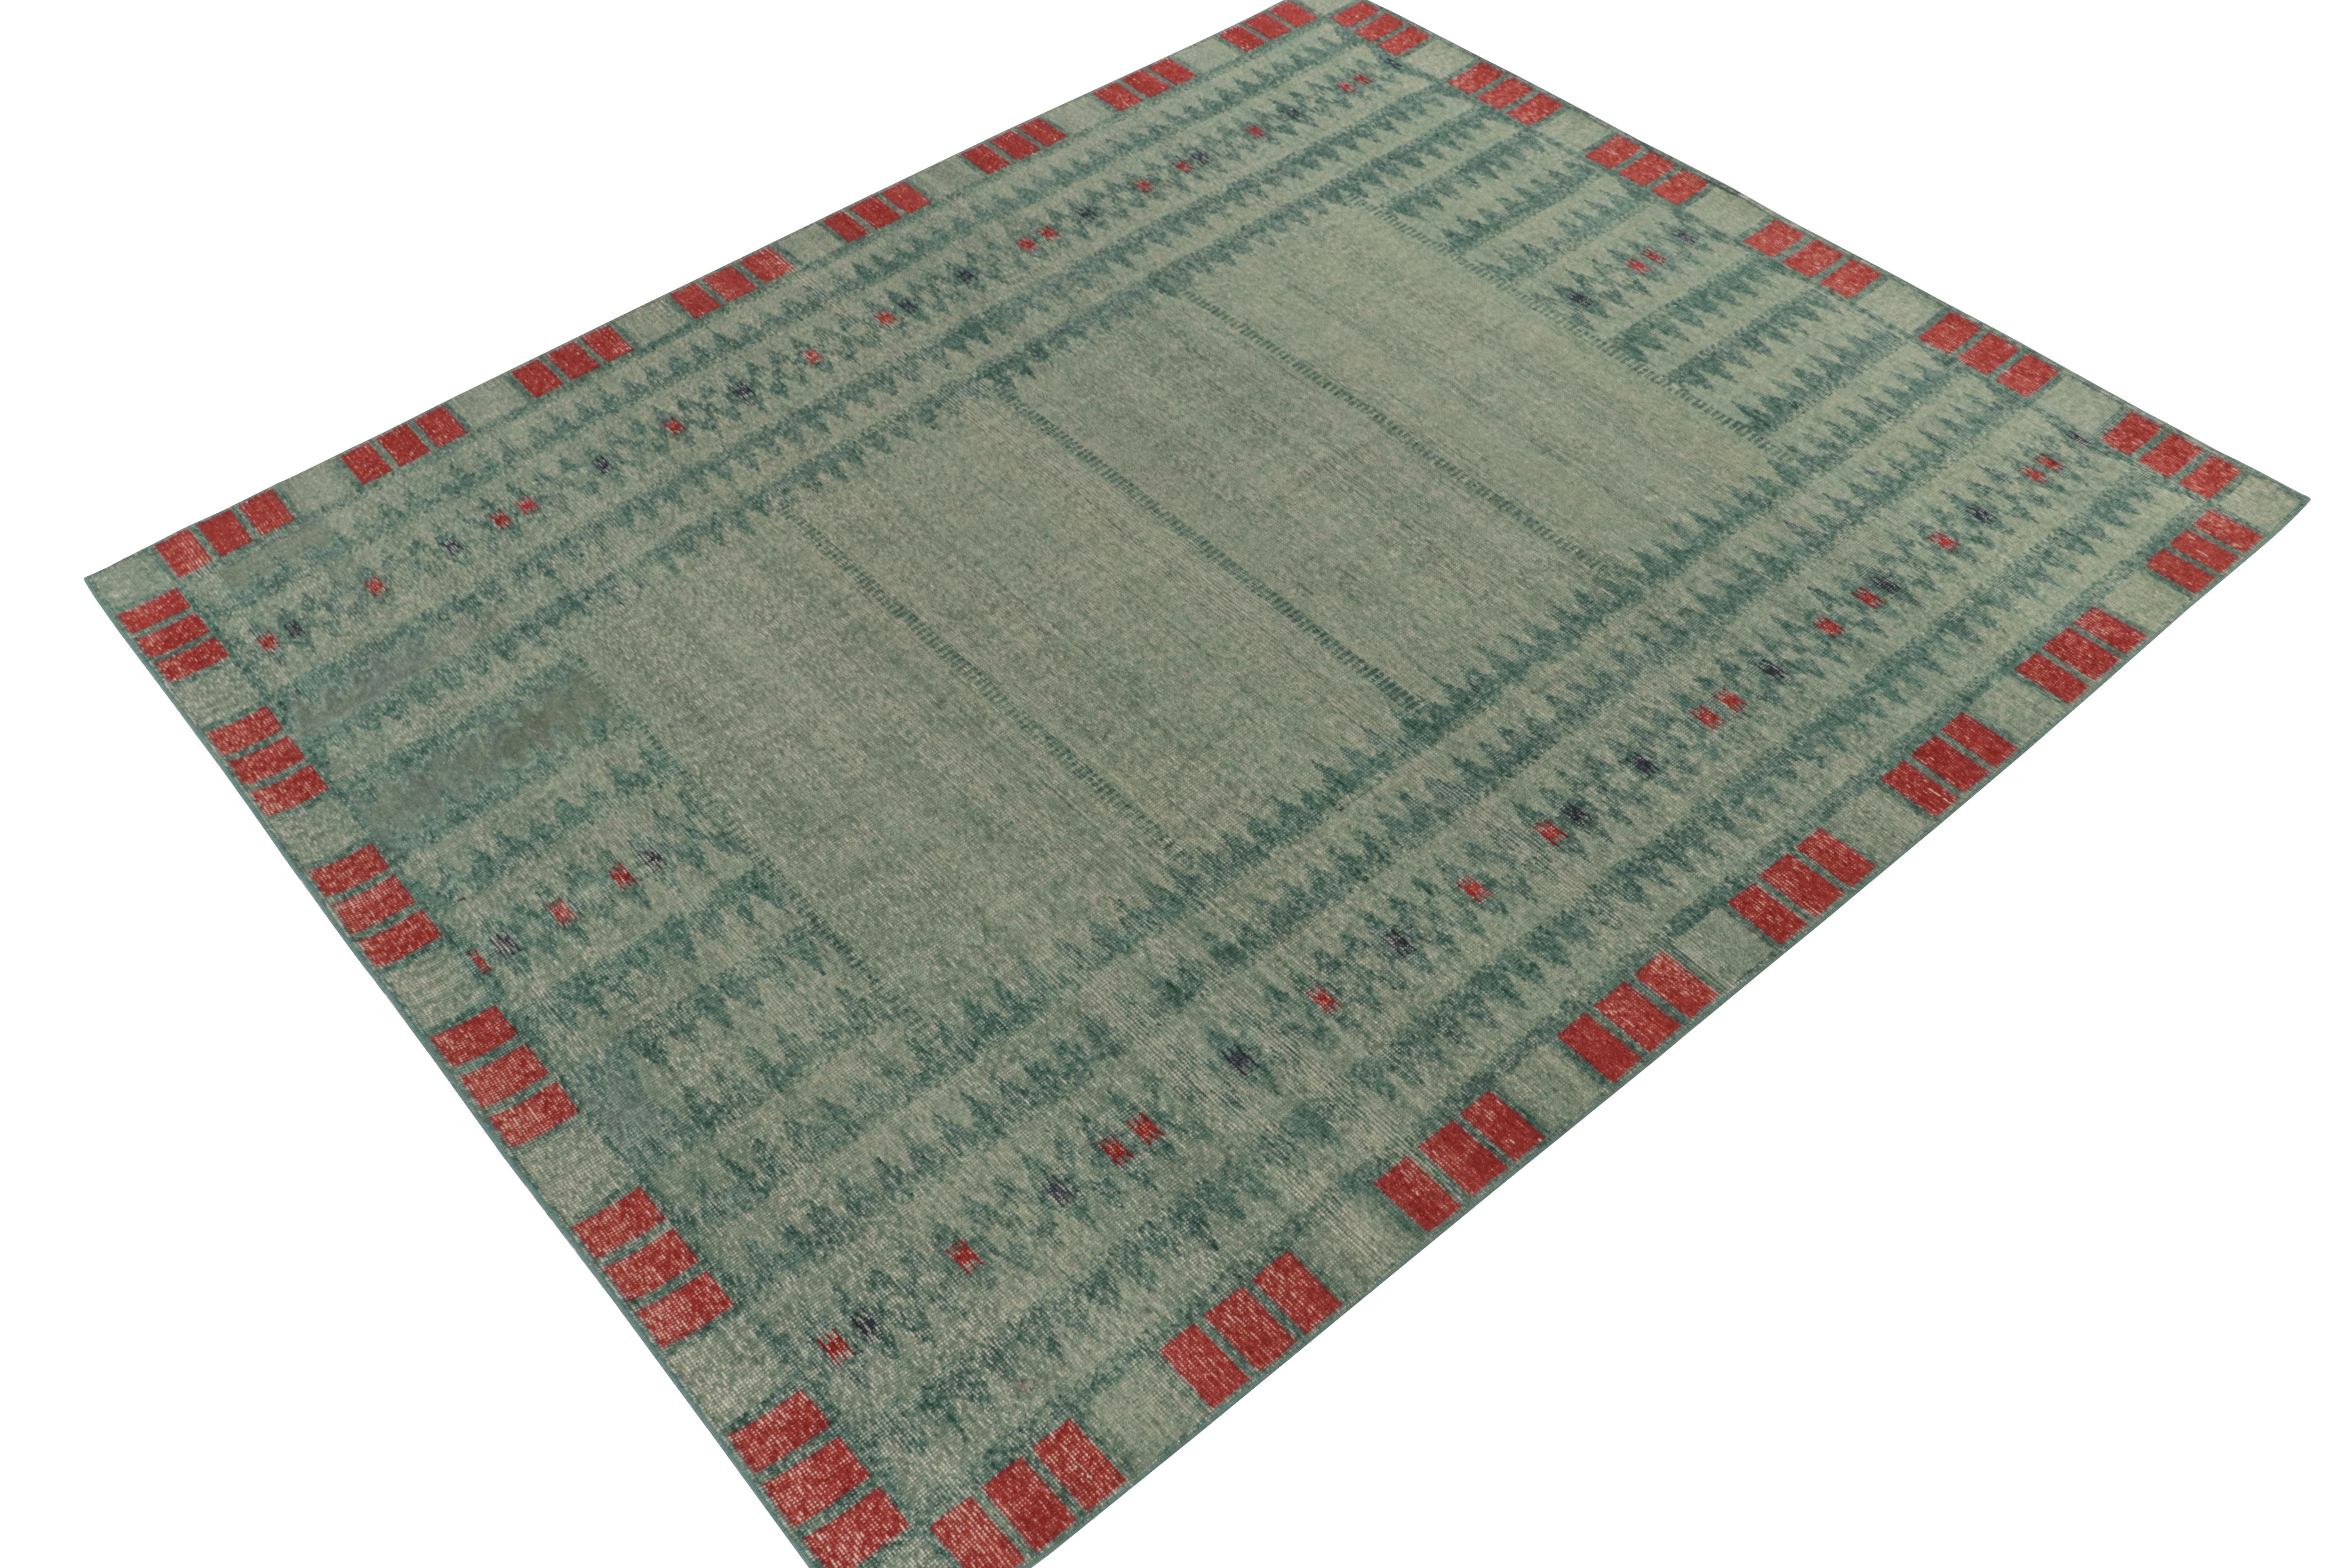 An 8x10 hand-knotted wool rug from Rug & Kilim’s Homage Collection, inspired by celebrated Swedish Deco aesthetics. 

On the Design: The vision recaptures sharp geometric patterns in aqua blue, green & scarlet red with a modern take on distressed